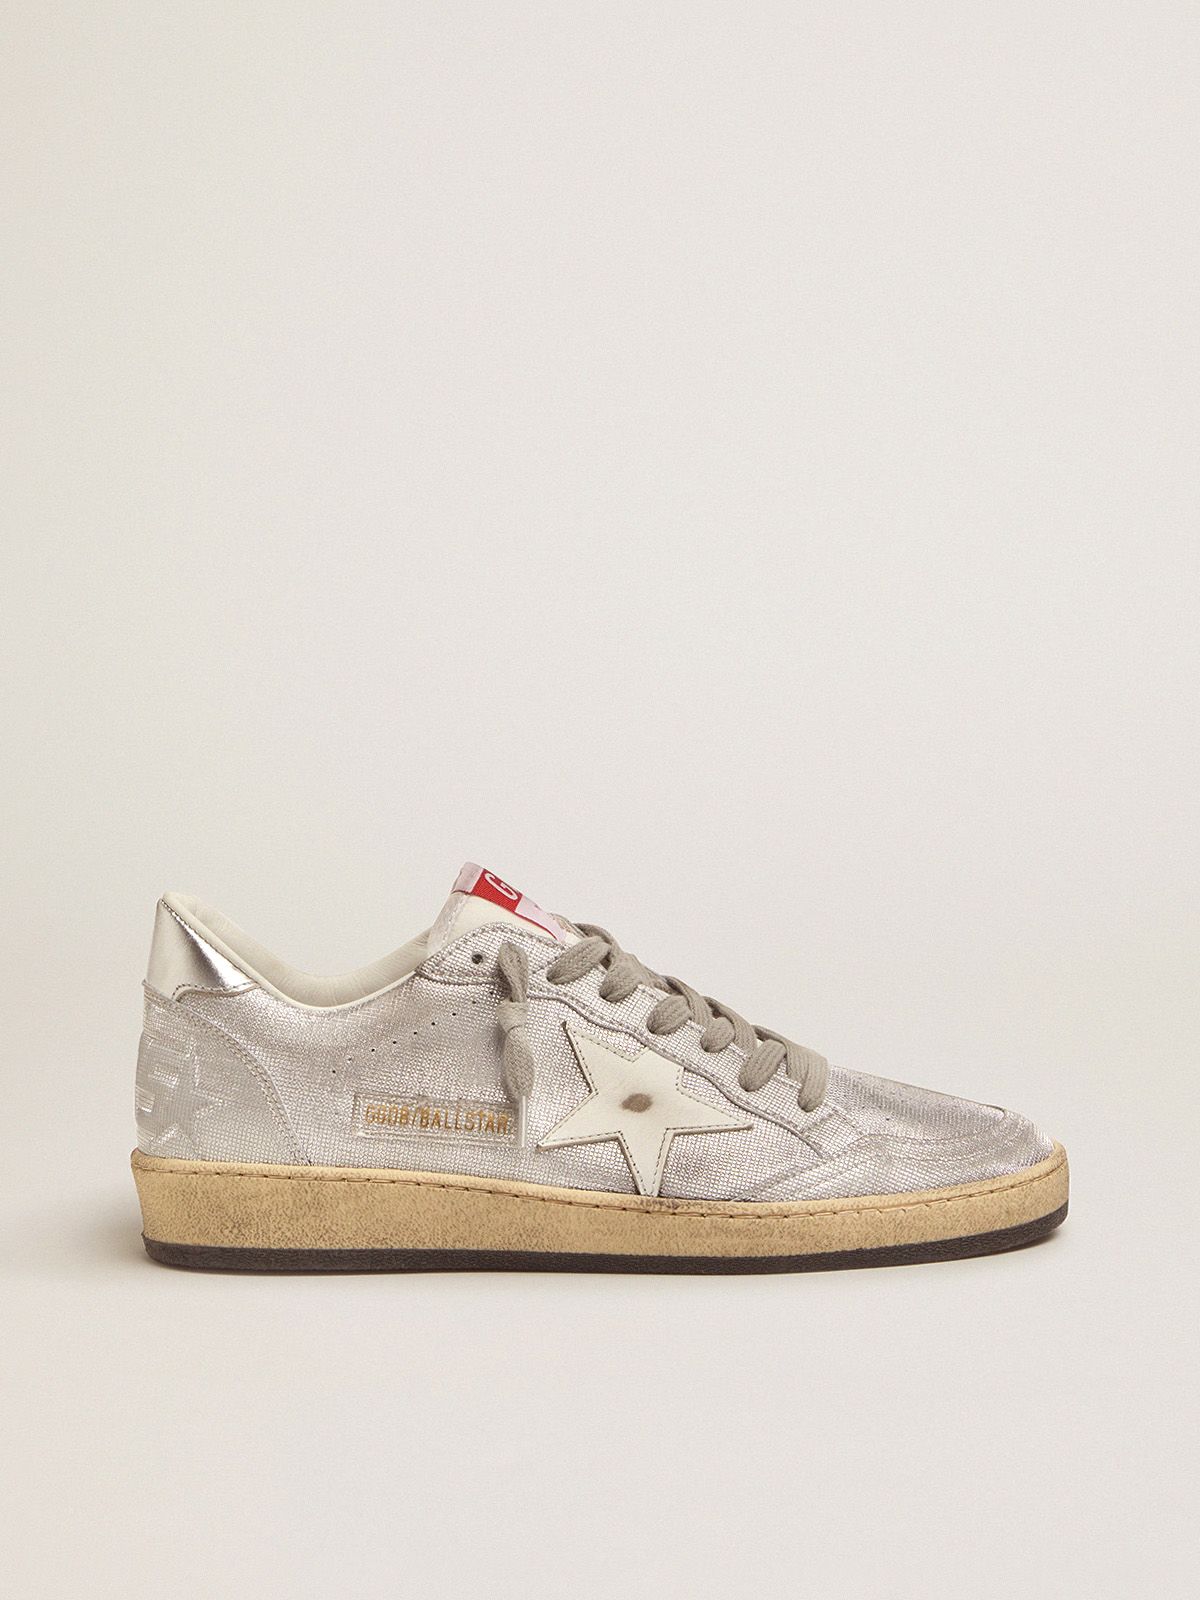 Ball Star LTD sneakers in silver leather | 